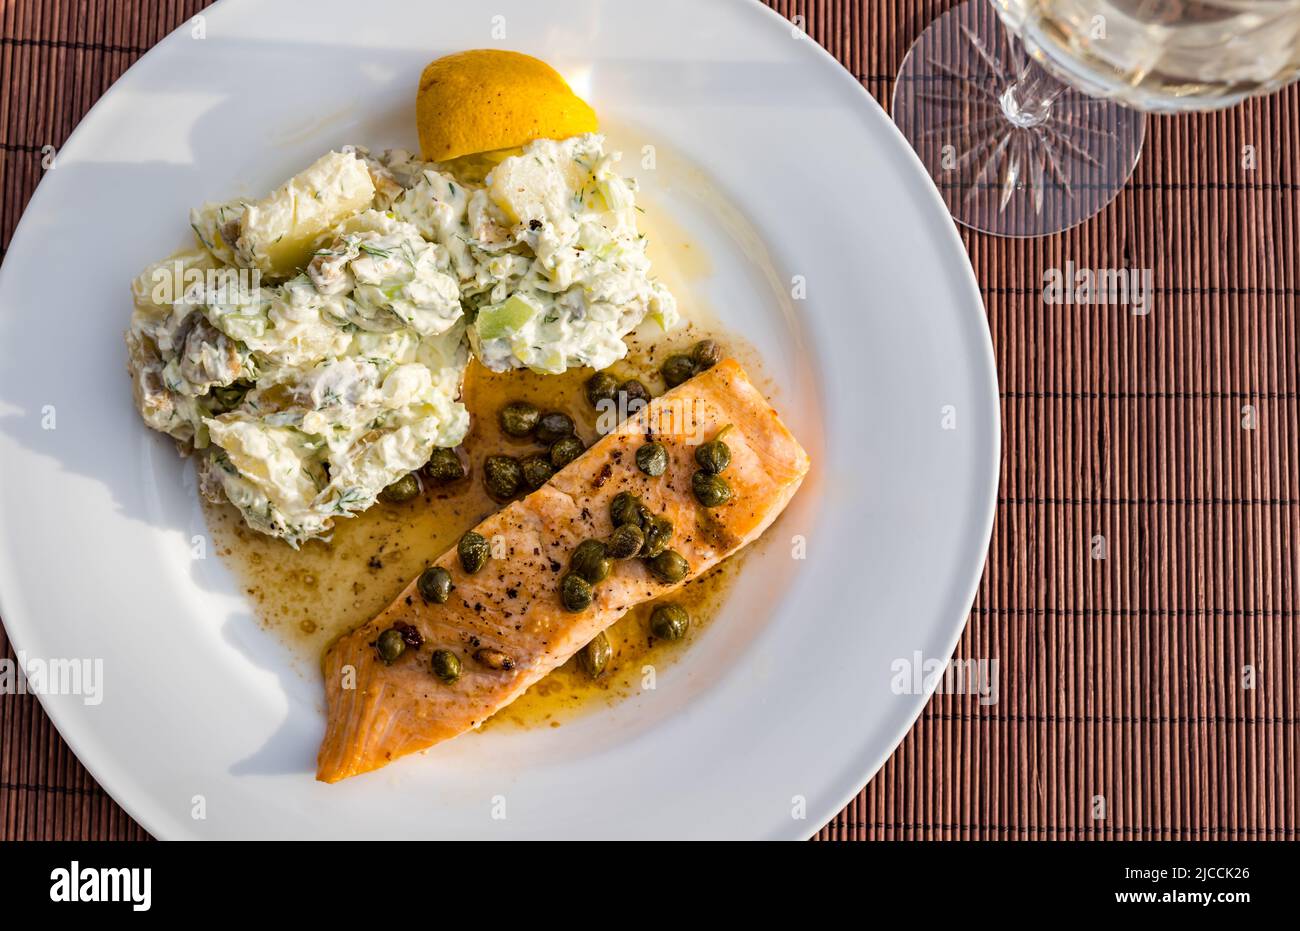 Dinner plate with slamon fillet & capers with potato salad & crystal wine glass for dinner on outdoor patio table in sunshine Stock Photo